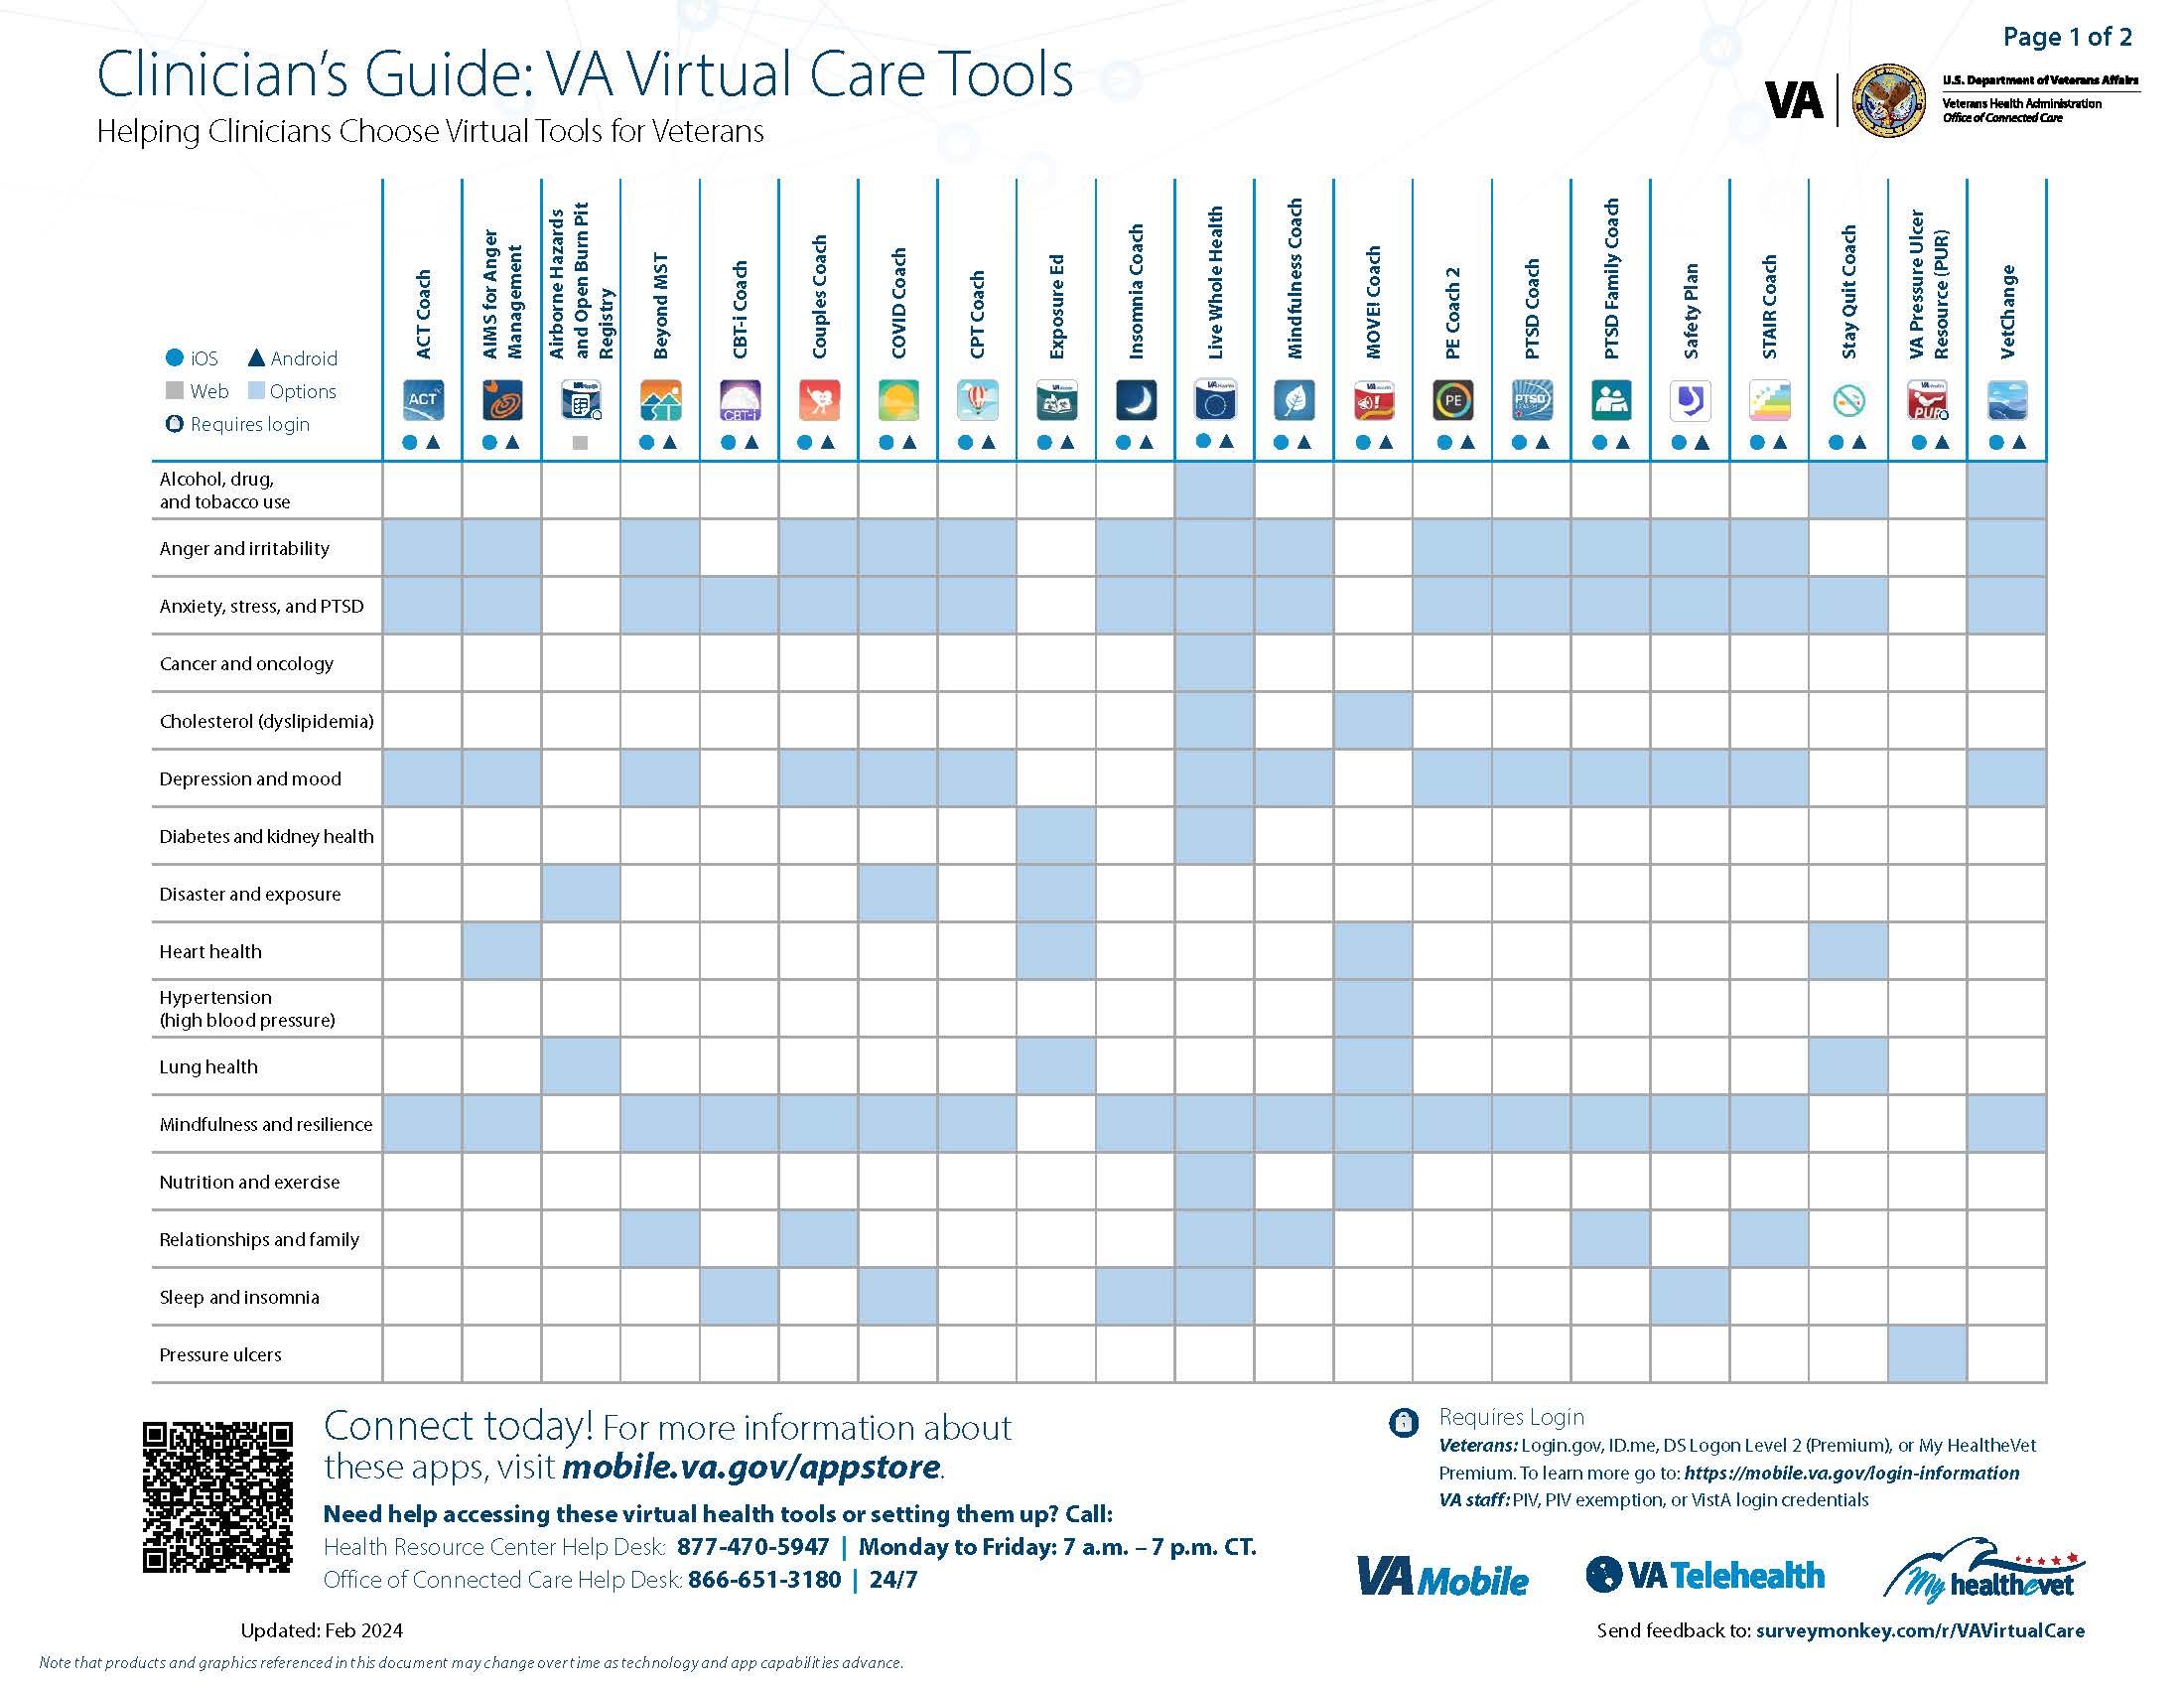 Thumbnail of Clinician's Guide for VA Virtual Care Tools